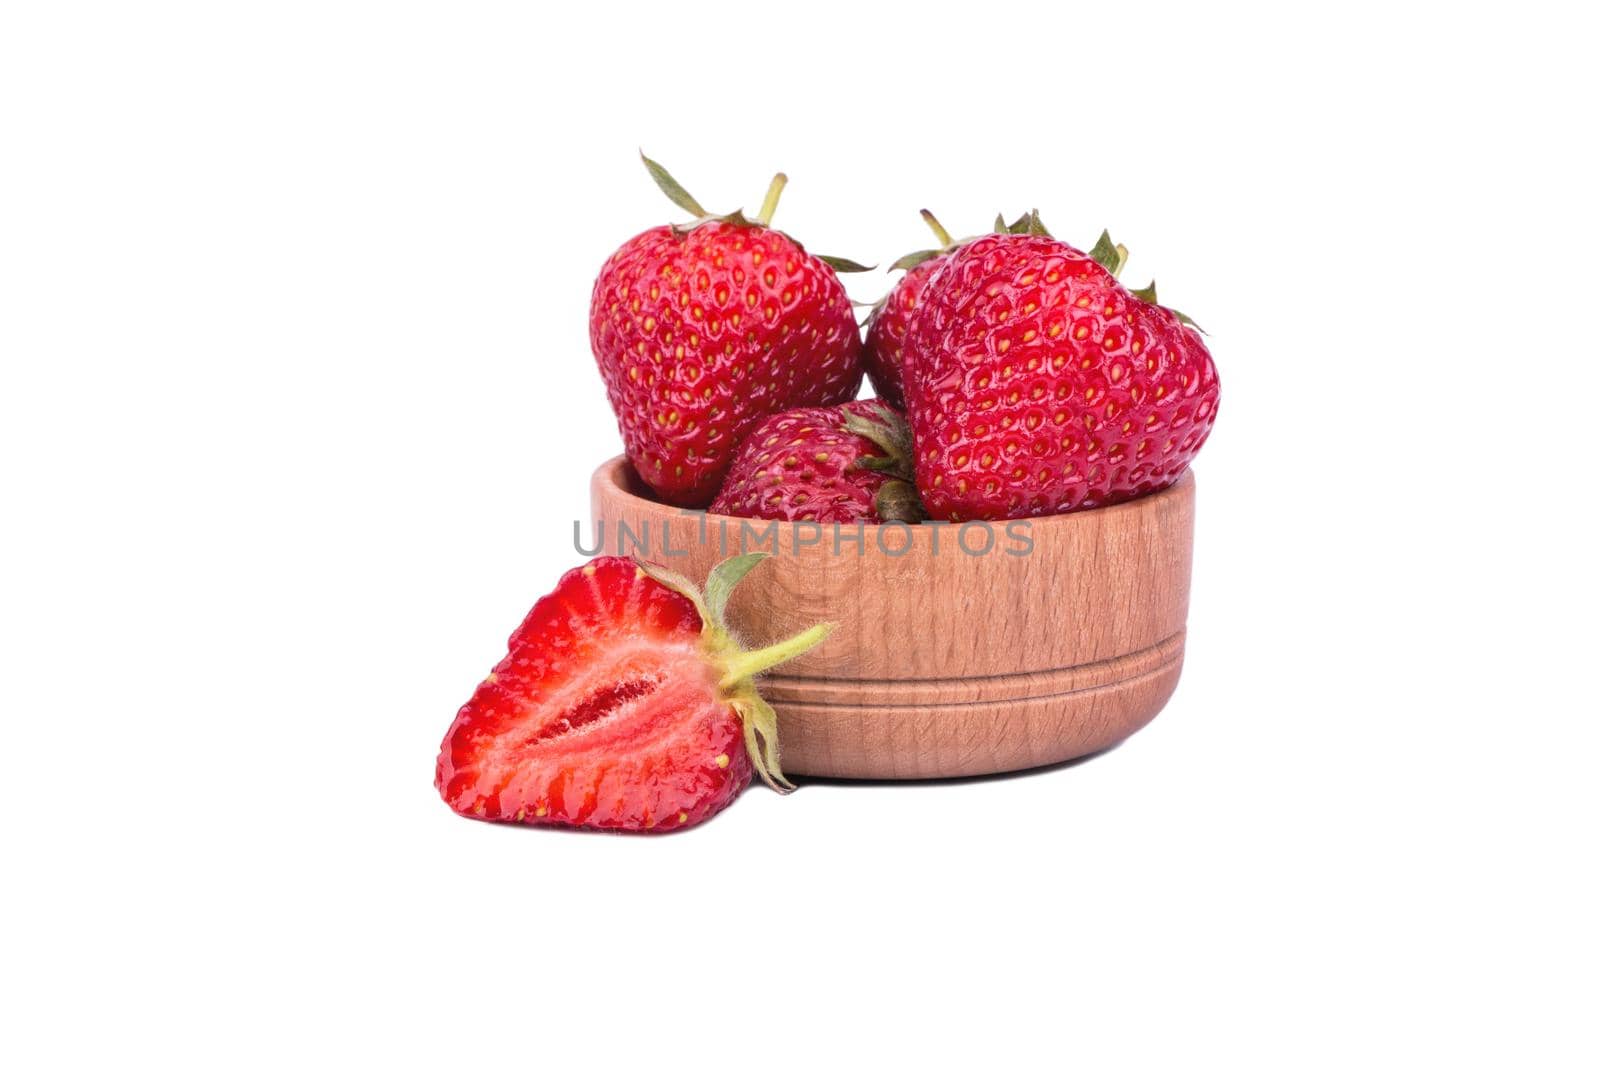 Ripe fresh strawberries in a small wooden bowl on a white background